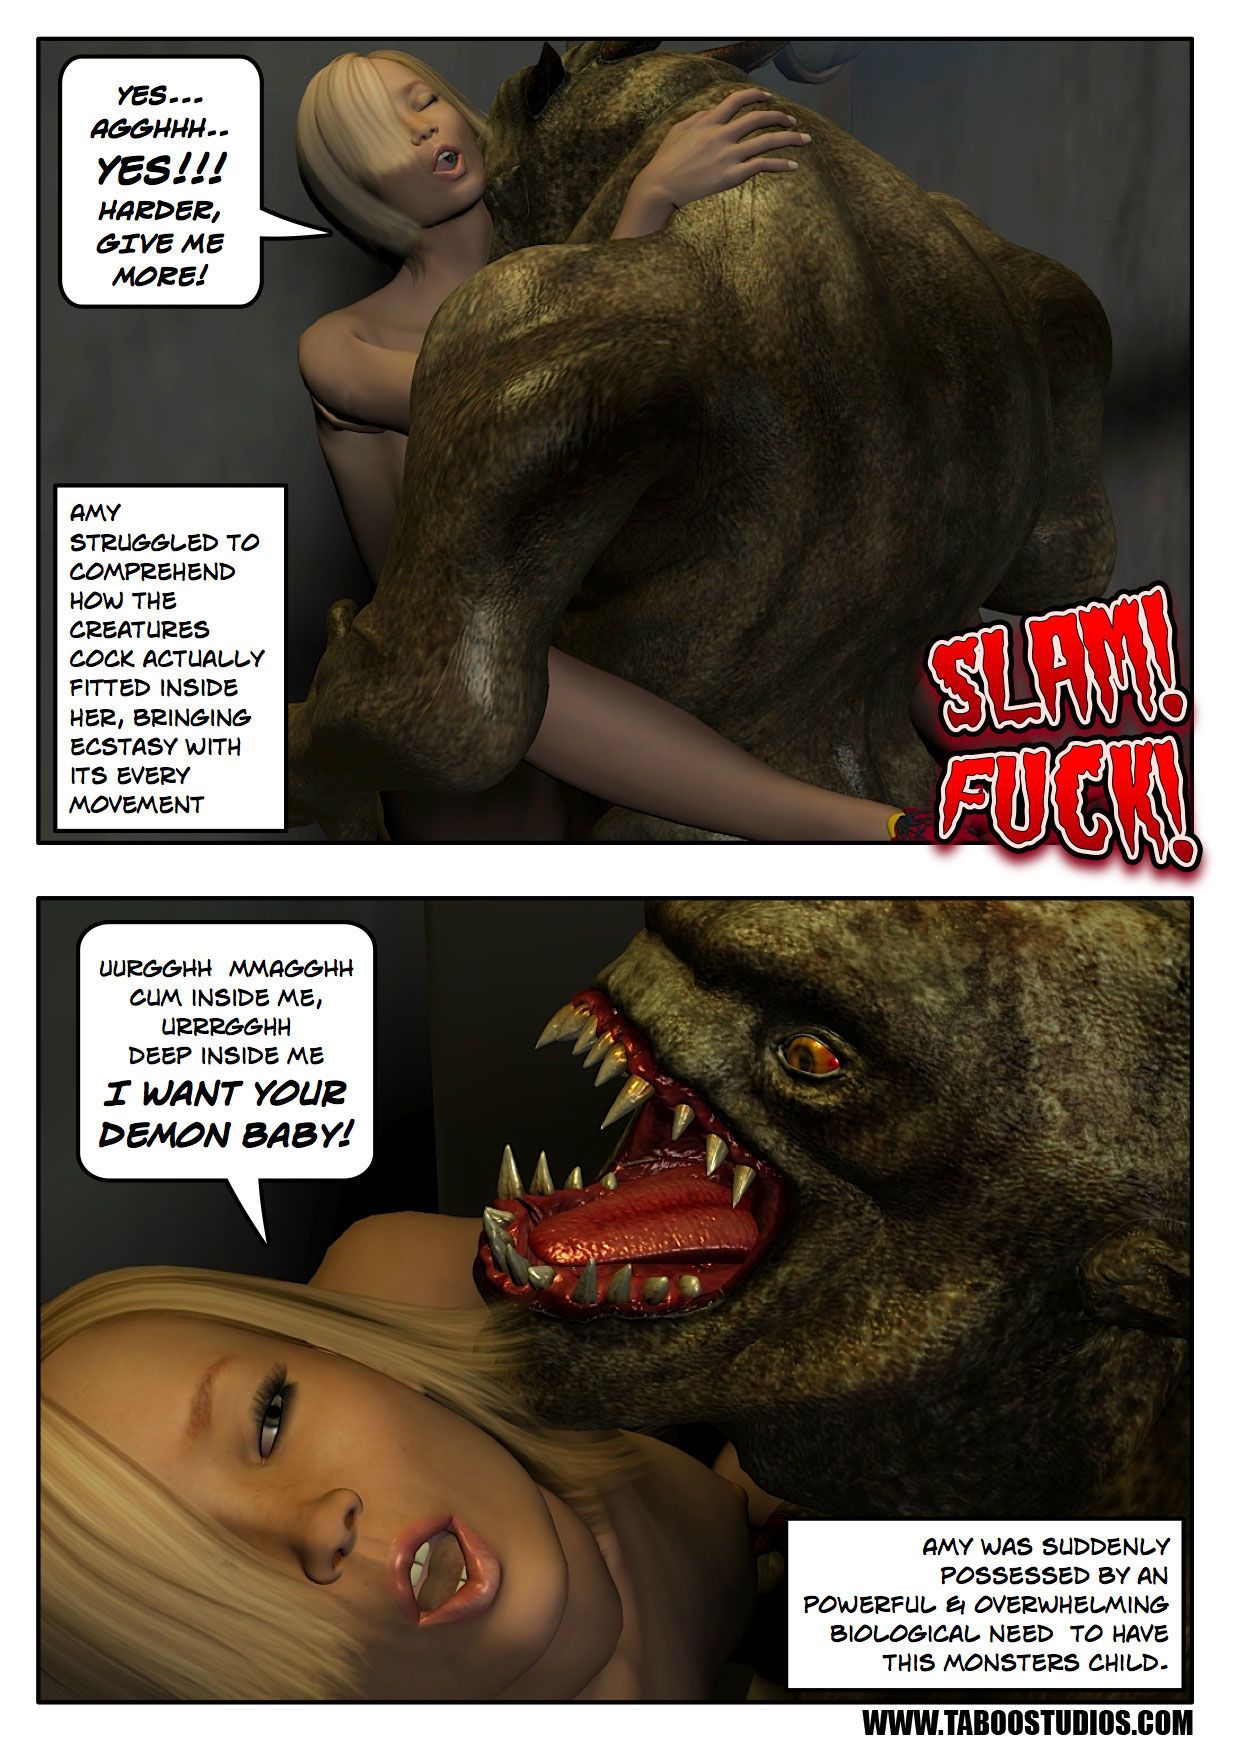 Slayer Issue 16 - part 2